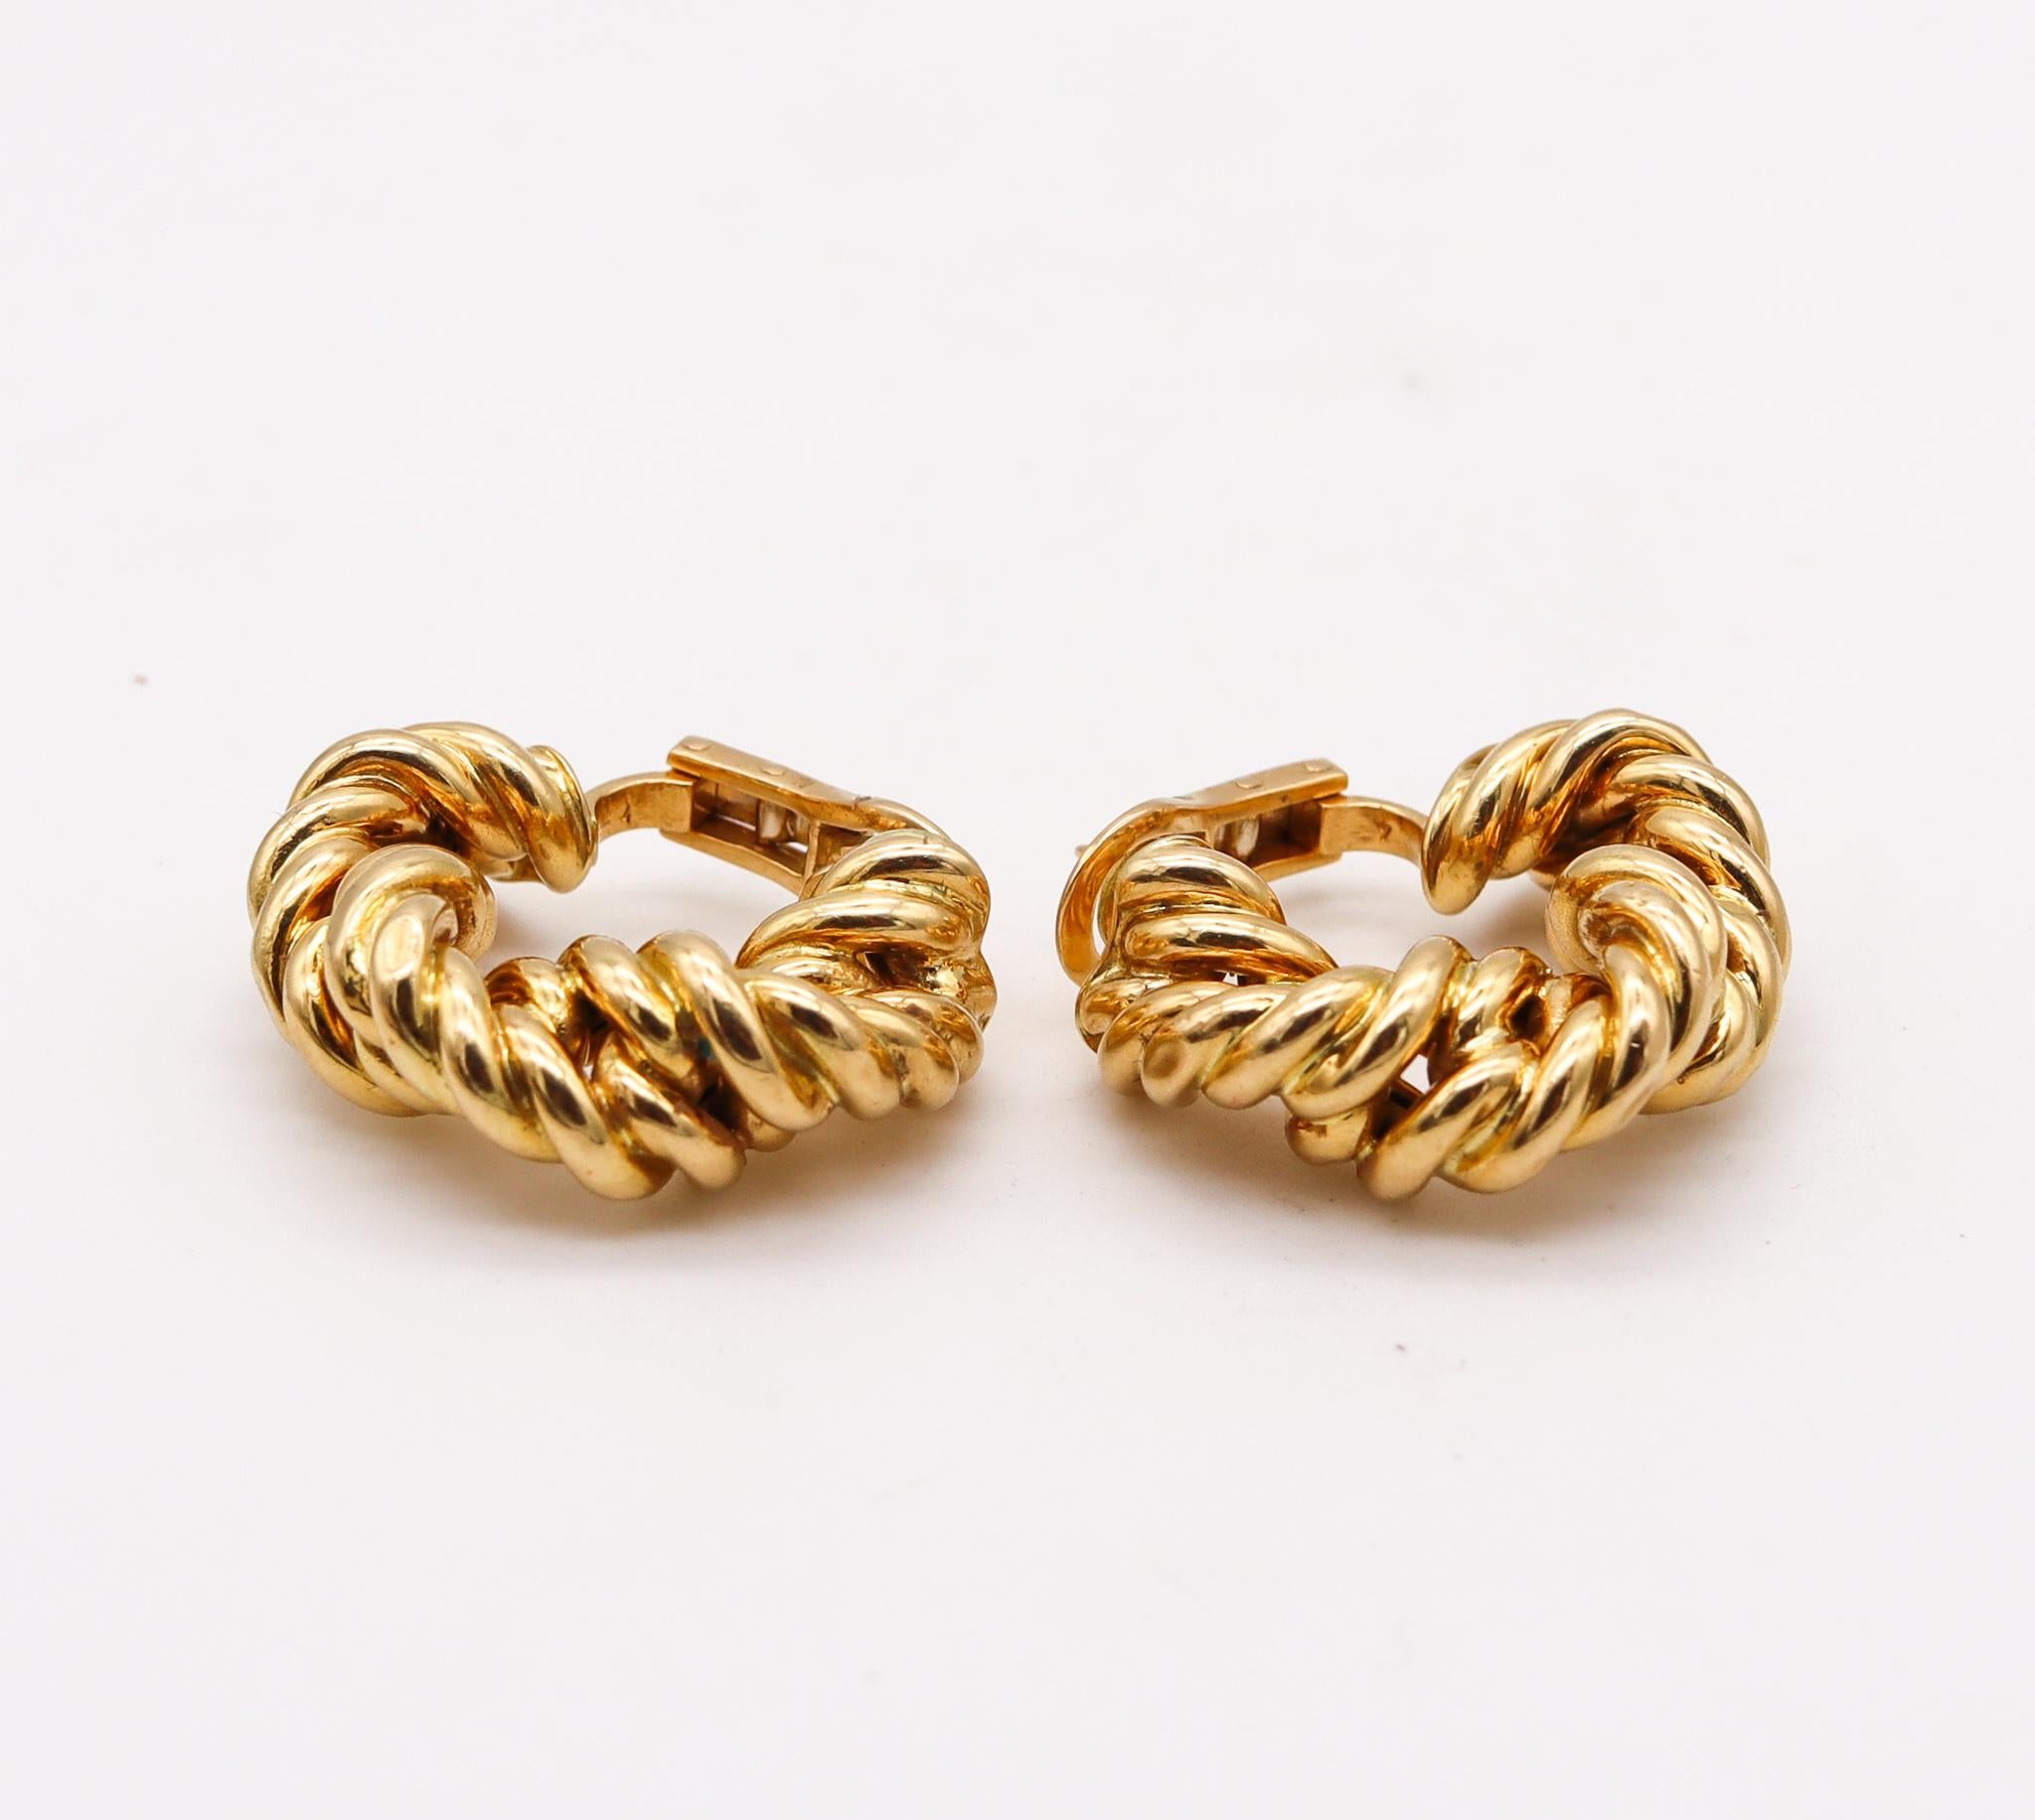 Modernist Tiffany & Co. France 1973 Donald Claflin Twisted Ropes Hoops Earrings 18k Gold